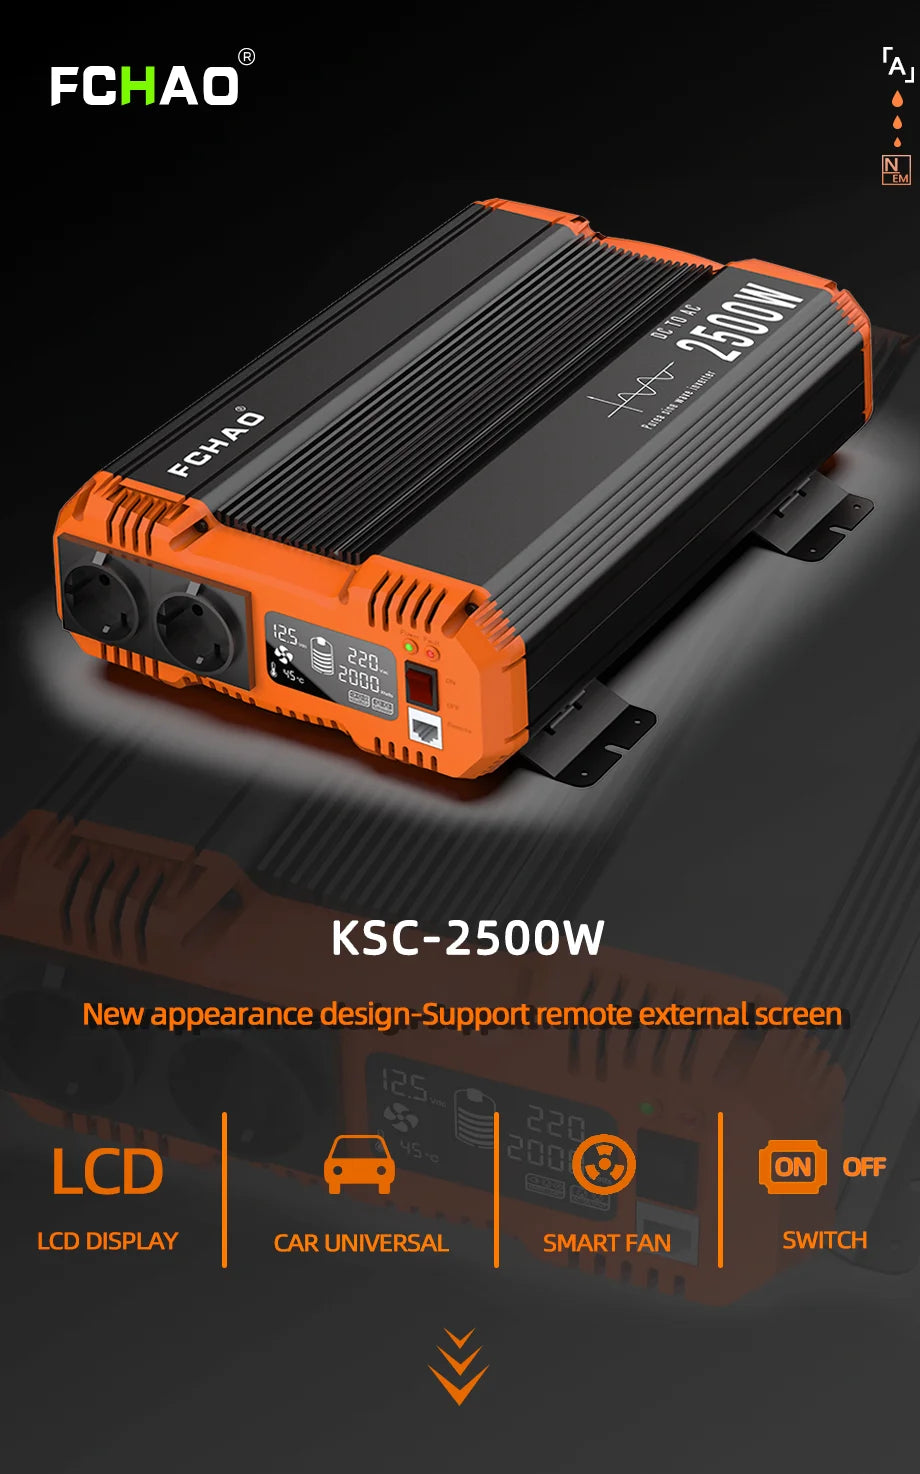 FCHAO 5000W Car Power Inverter, Pure sine wave car power inverter with LCD display and universal socket for home use.